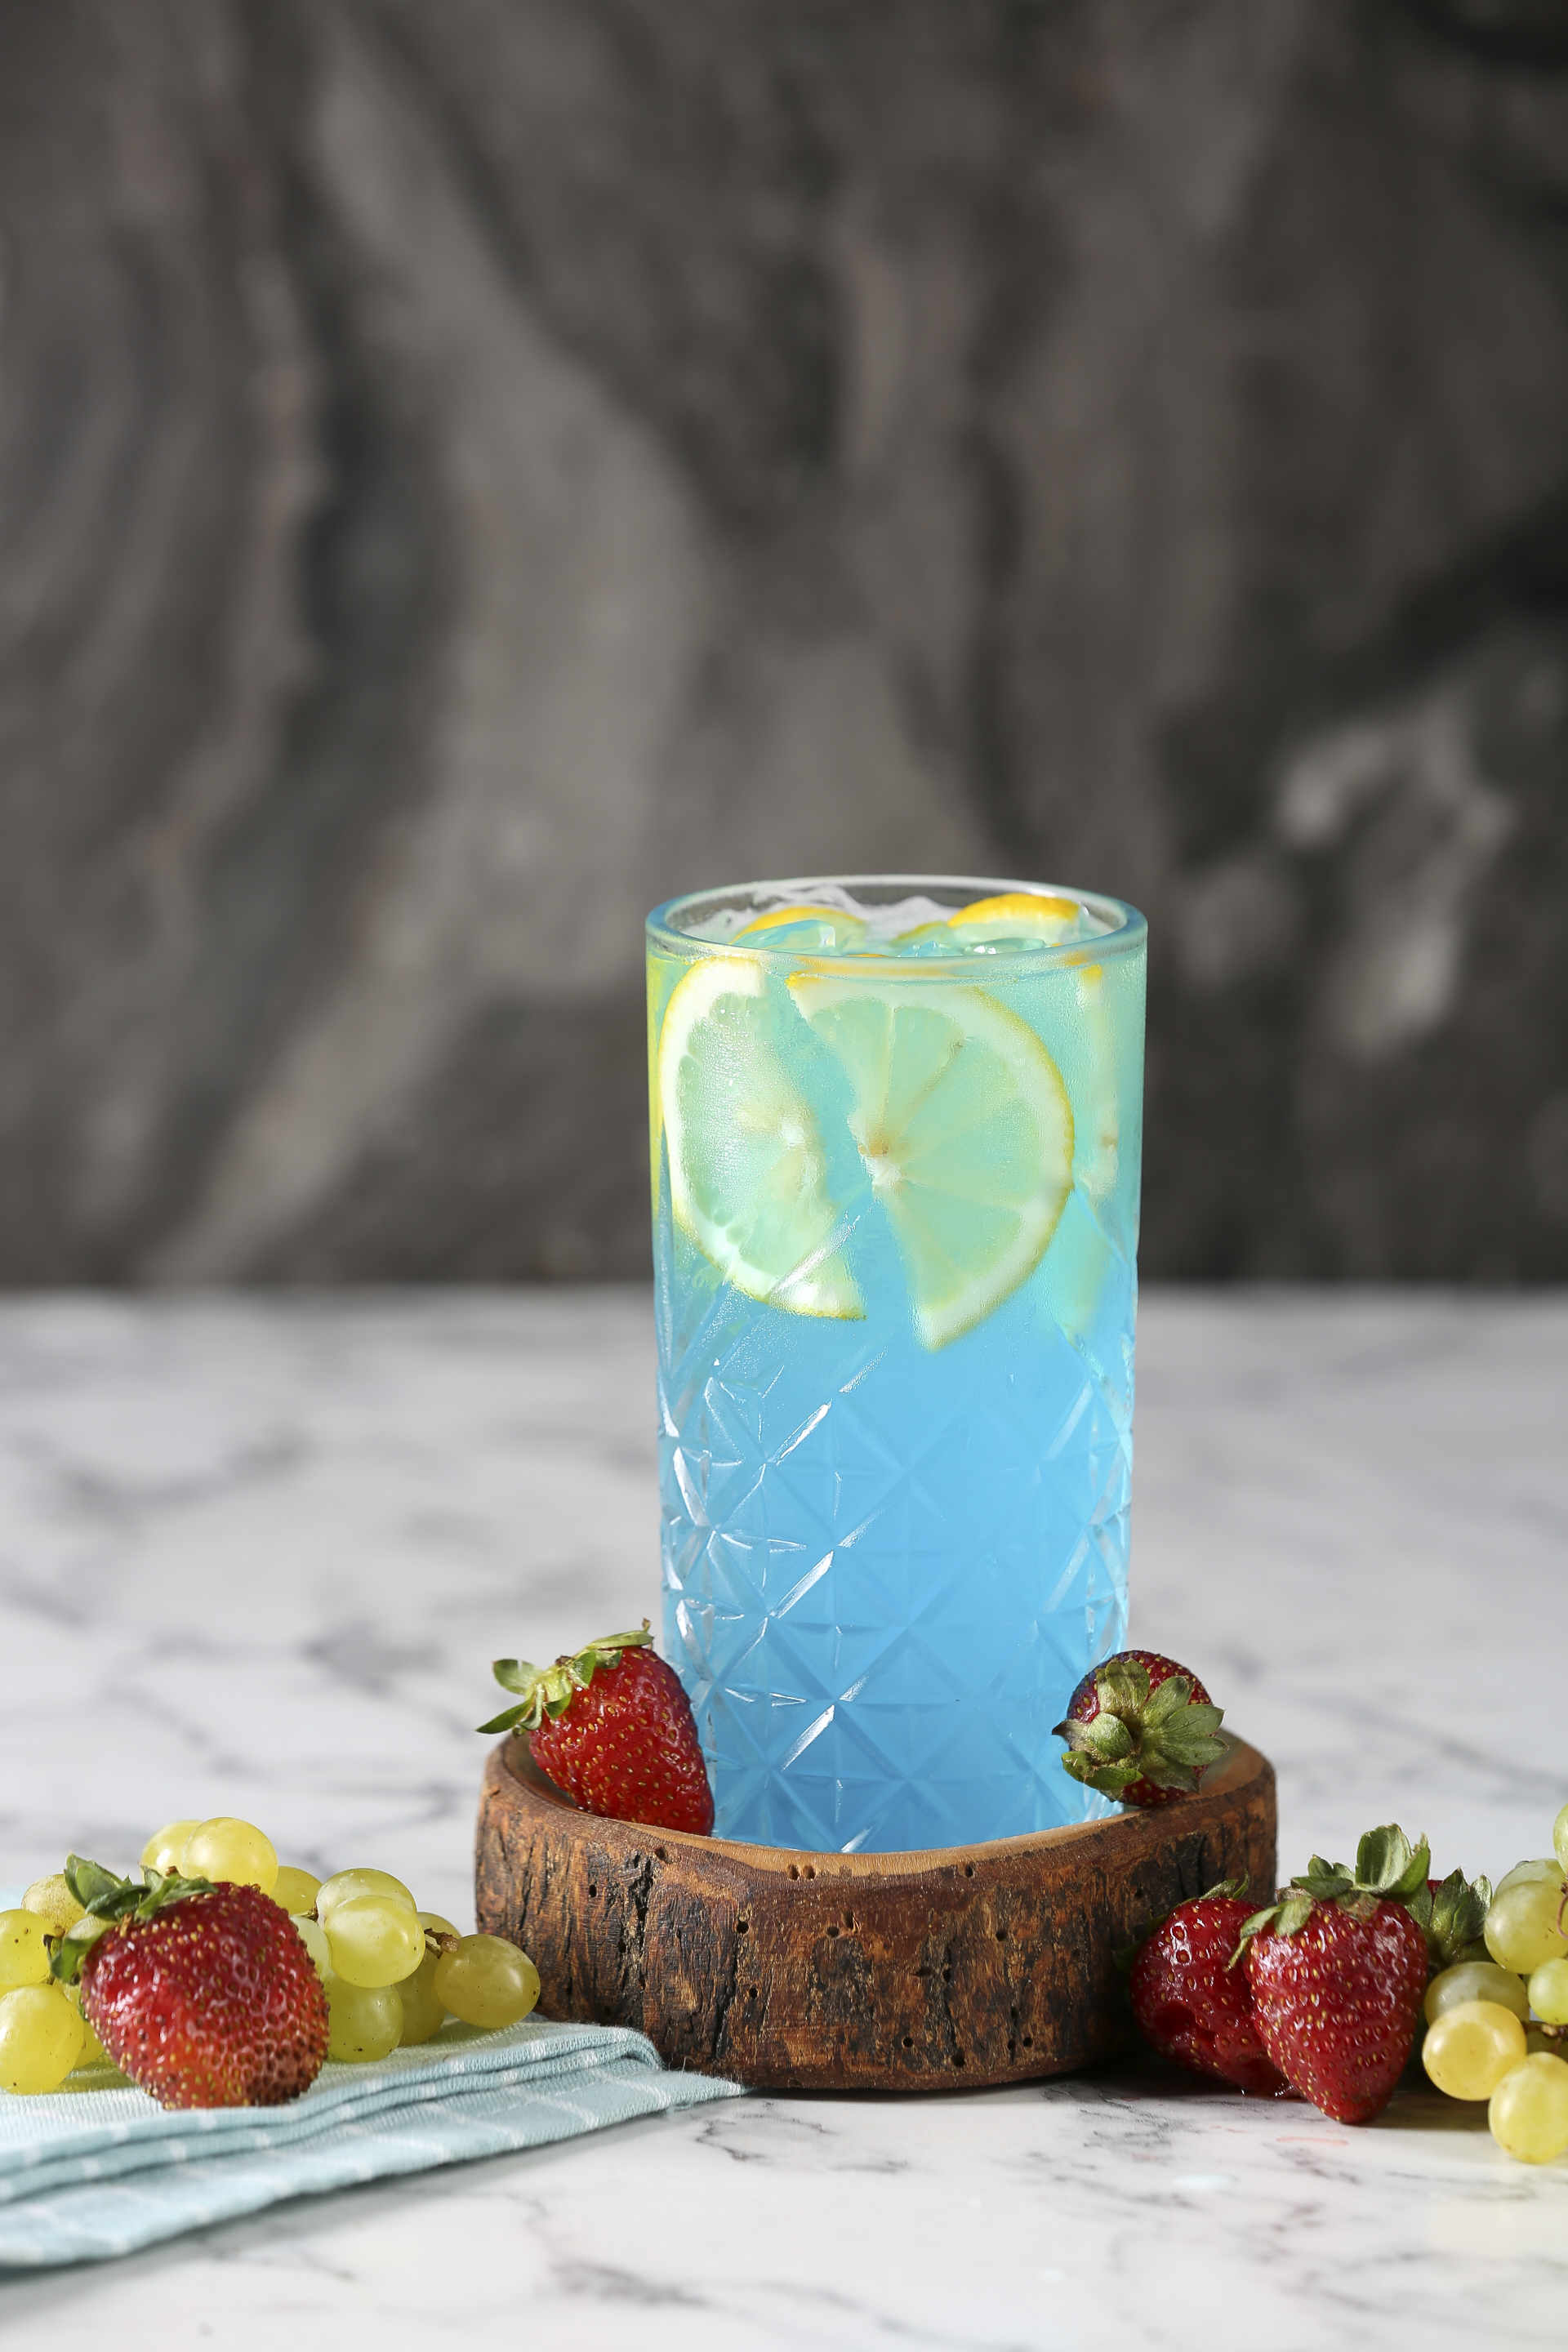 Glass of Blu Tonic in a crude wooden tray with strawberries and grapes